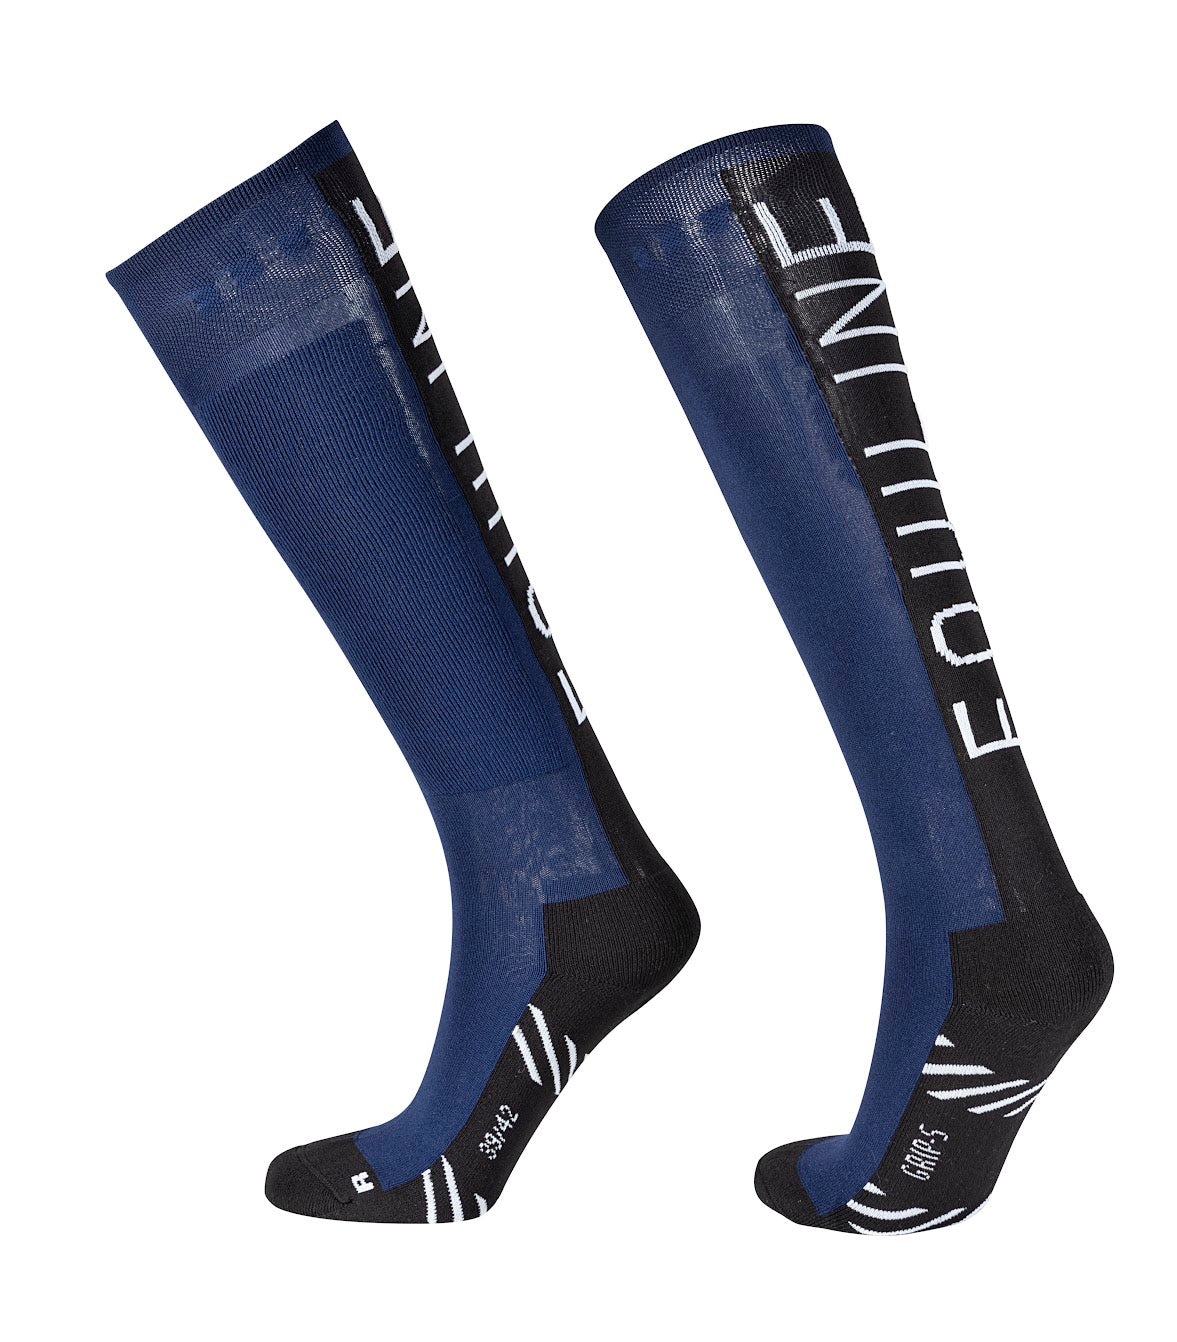 These Equiline Cobalt blue socks are perfect for riding. Their soft fabric ensures close contact and control. There is an elastic top to stop the socks falling down, and a reinforced heel and toe for durability. Finished with a contemporary design and large text running vertically down the back of the calf.